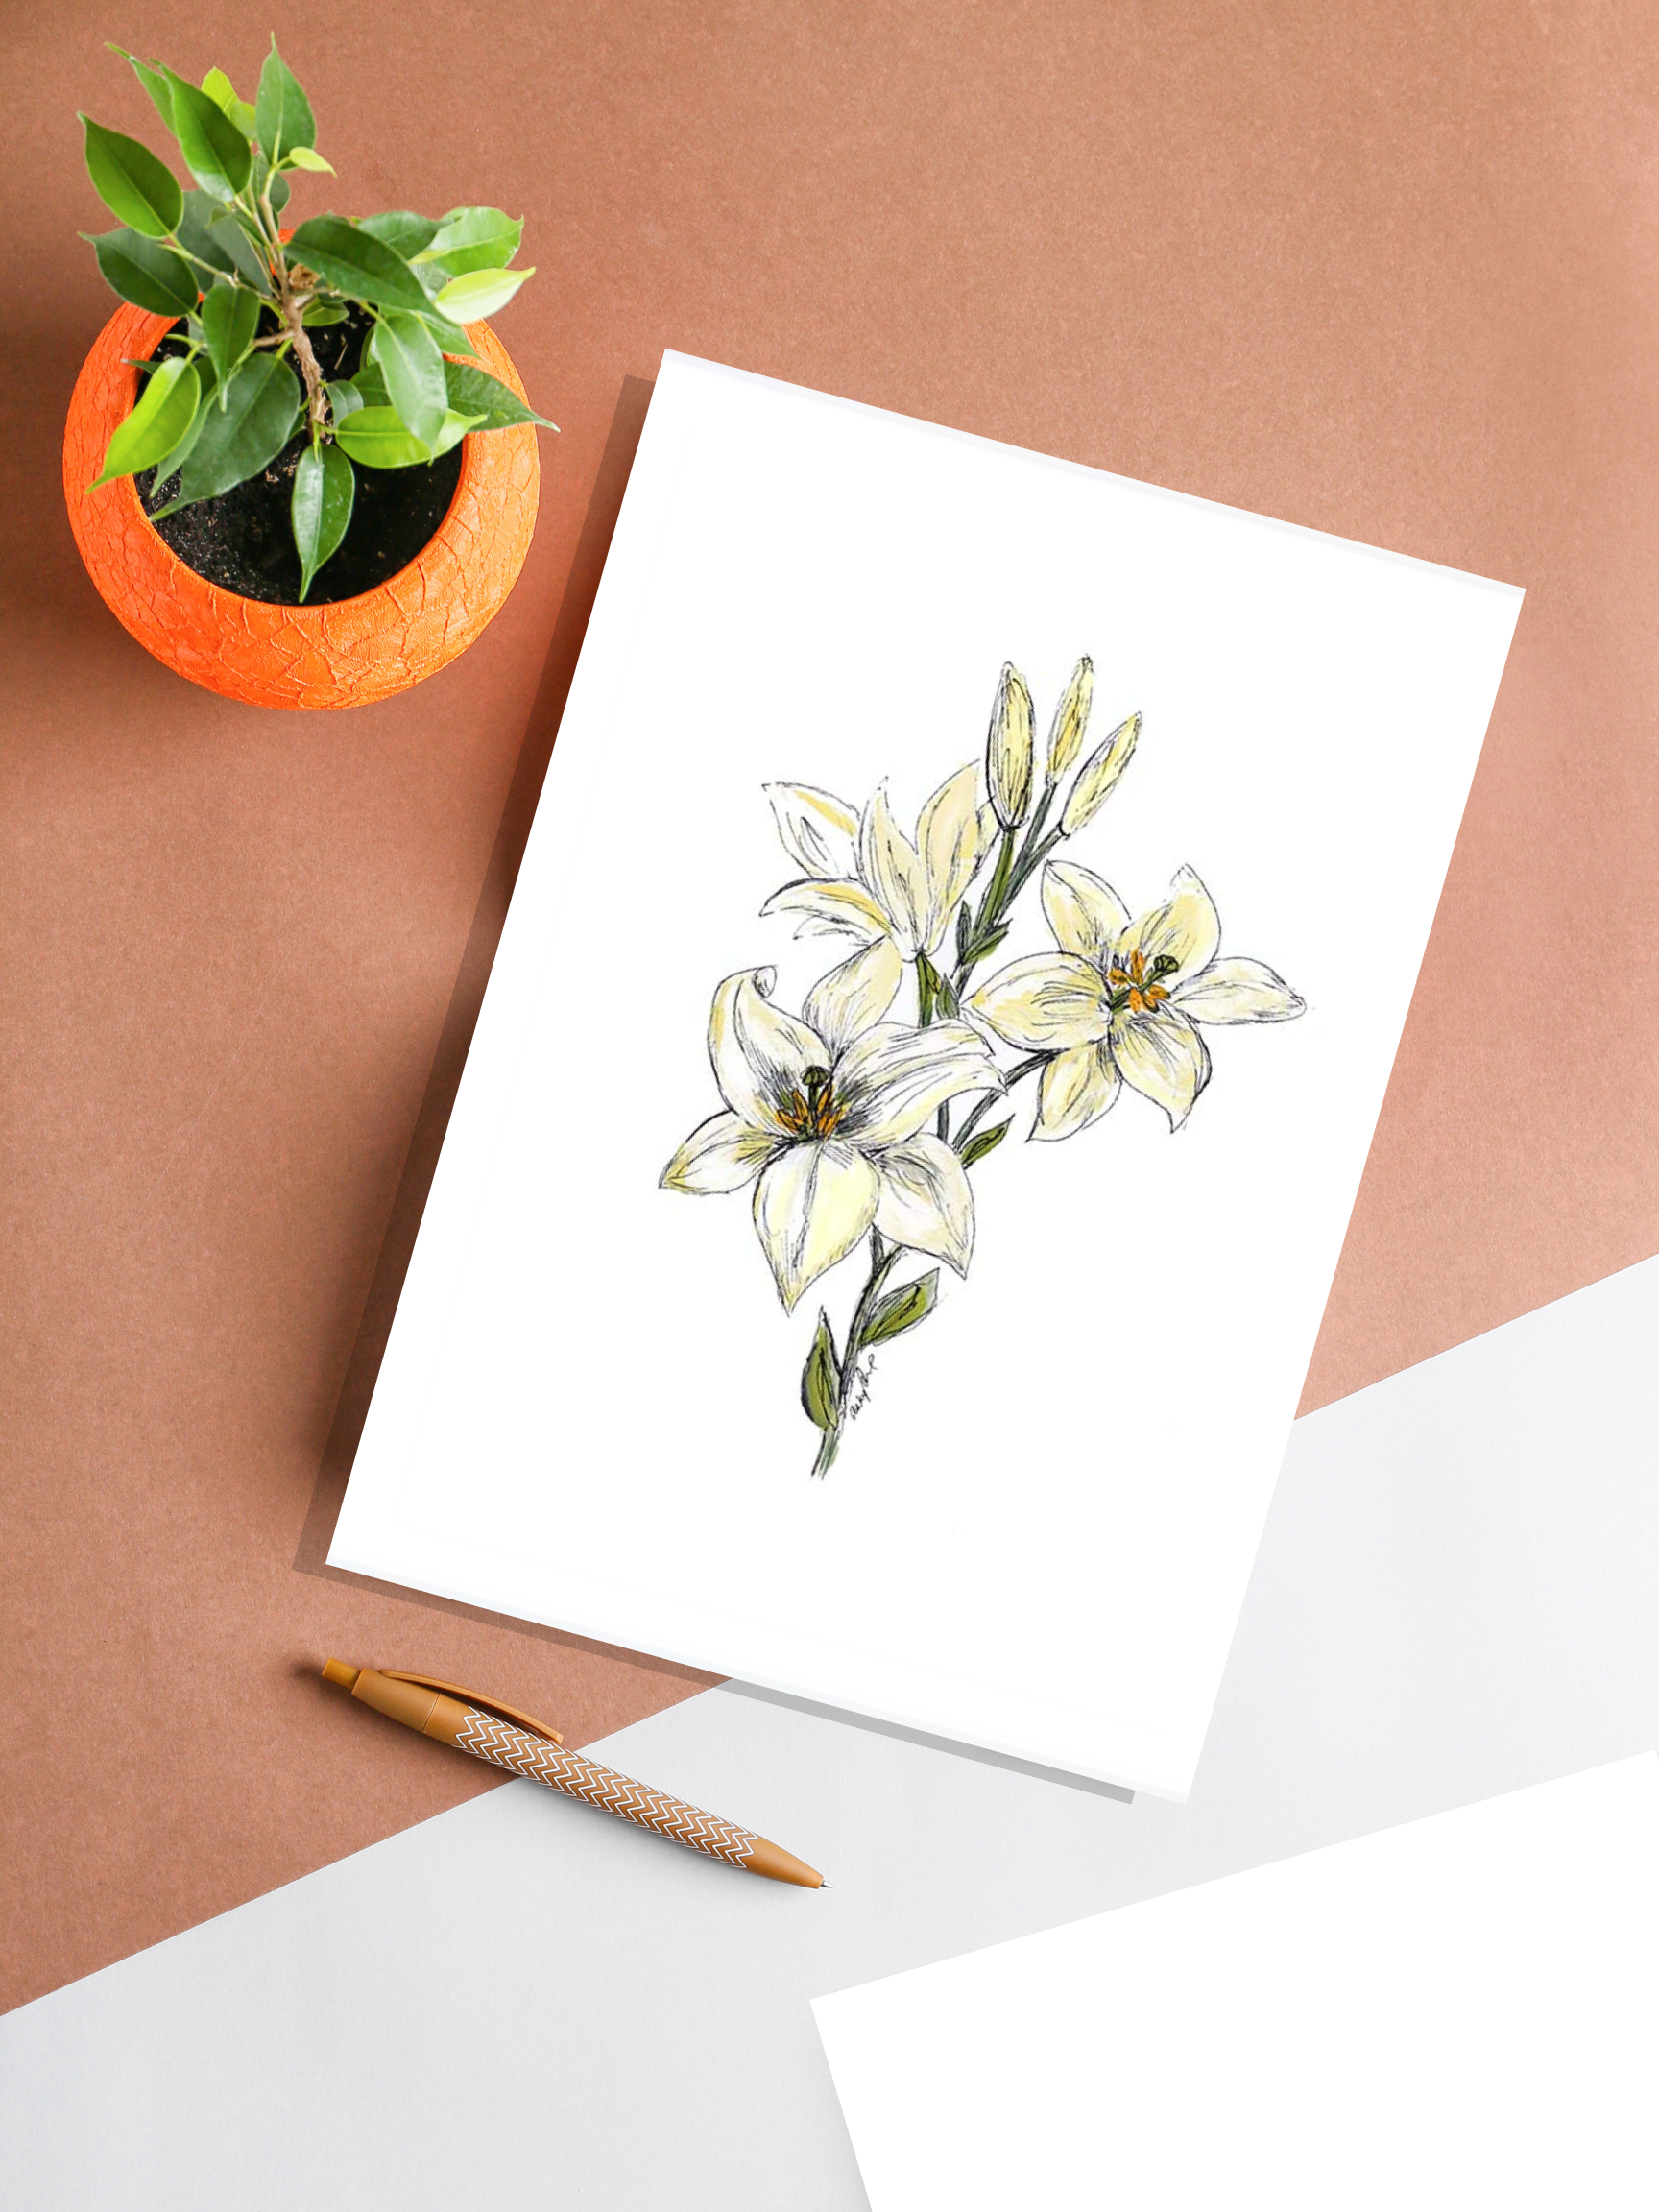 daylily art print on table